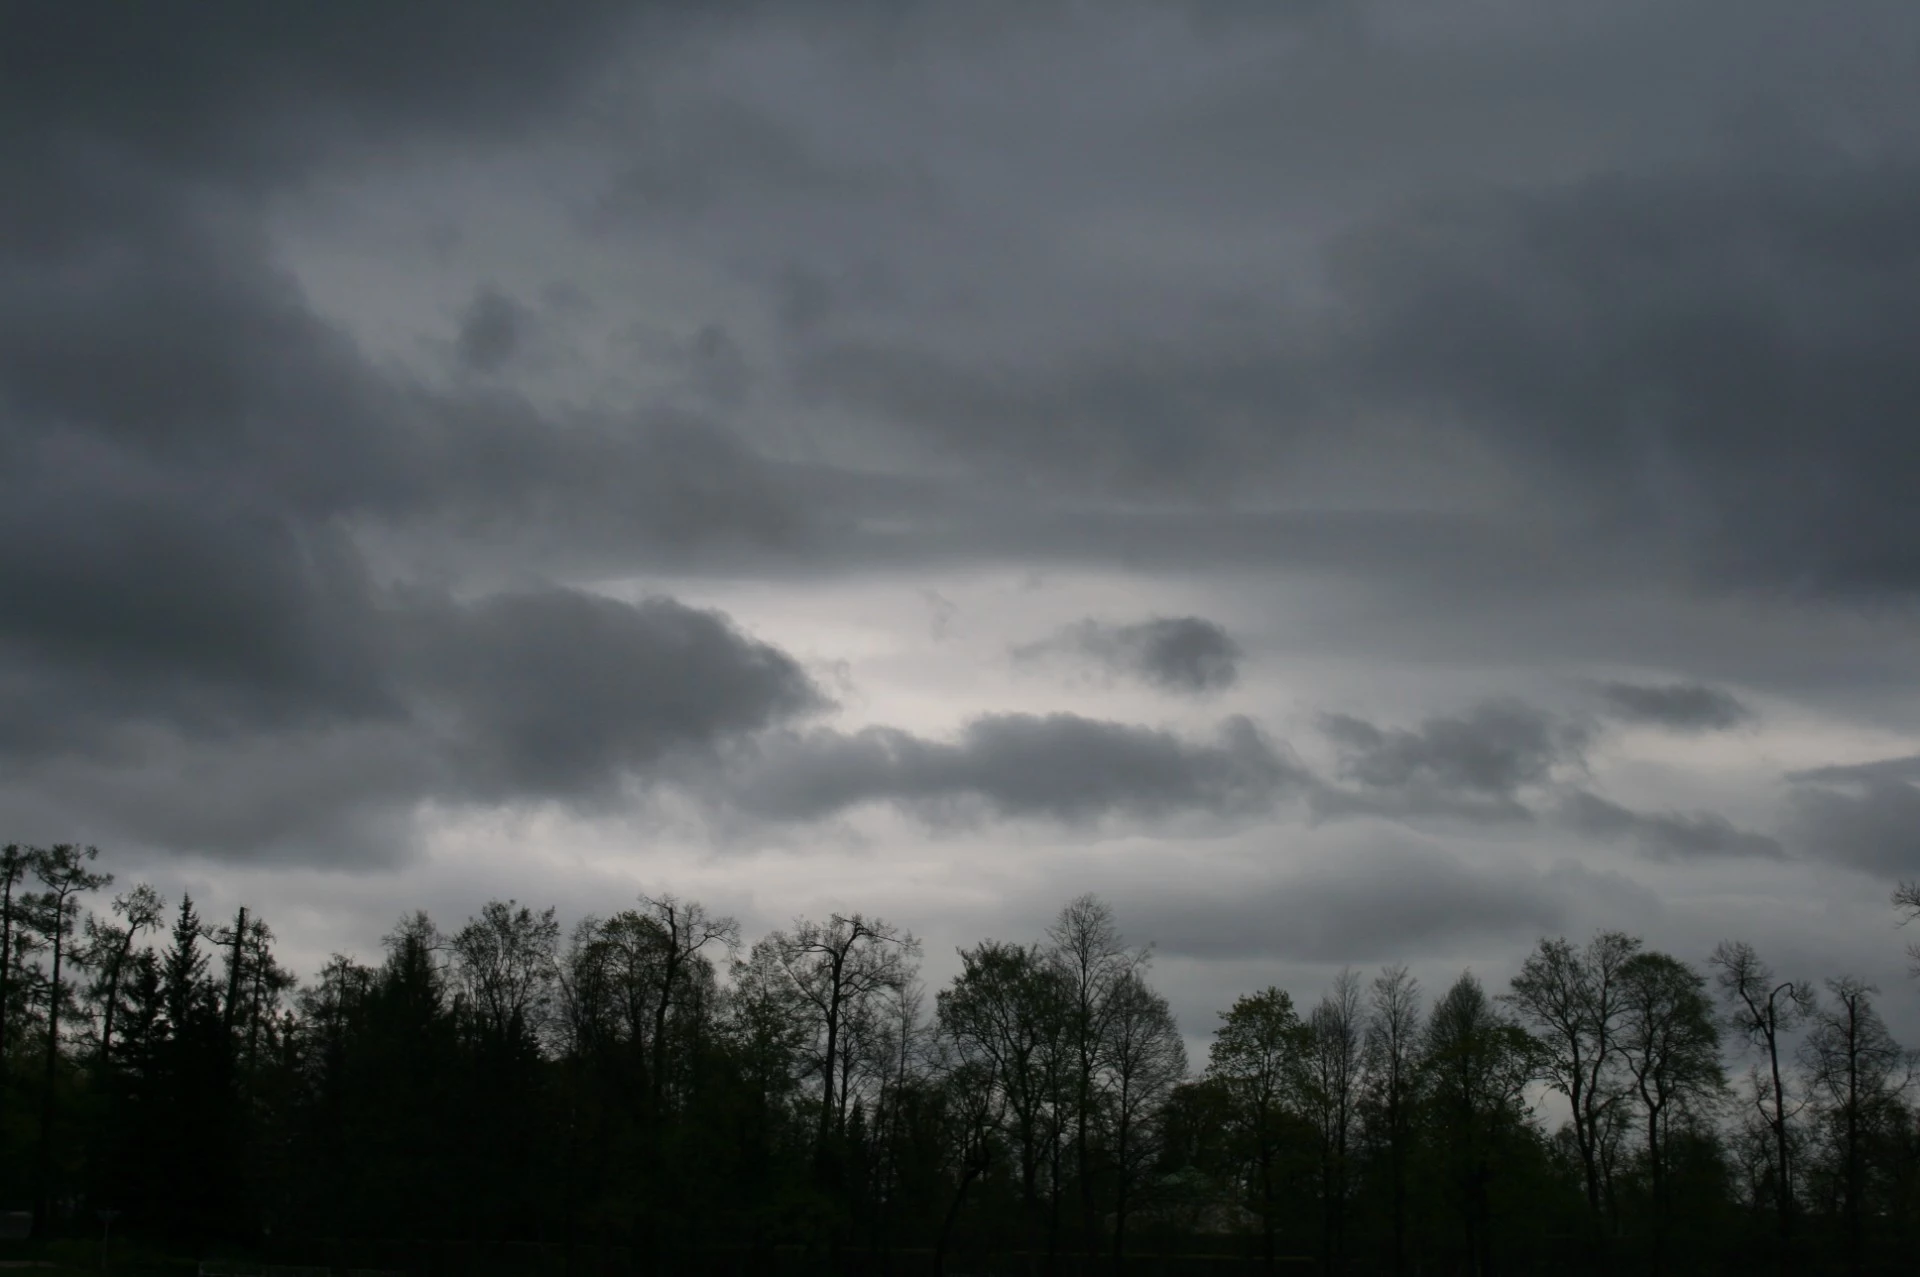 https://townsquare.media/site/385/files/2016/05/grey-sky-above-the-trees.jpg